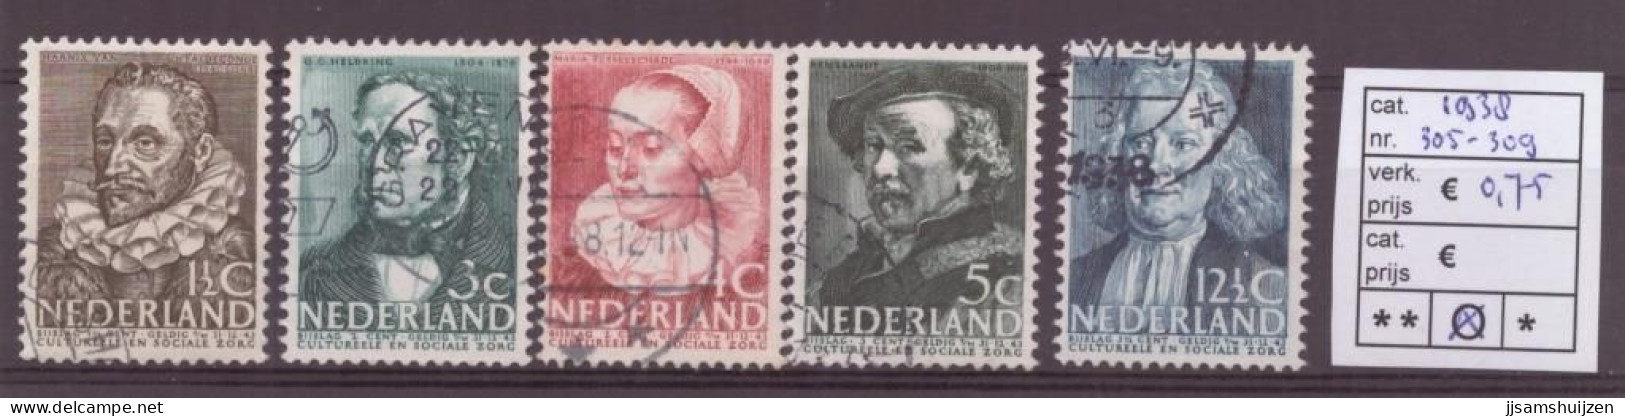 Netherlands Stamps Used 1938,  NVPH Number 305-309, See Scan For The Stamps - Gebruikt